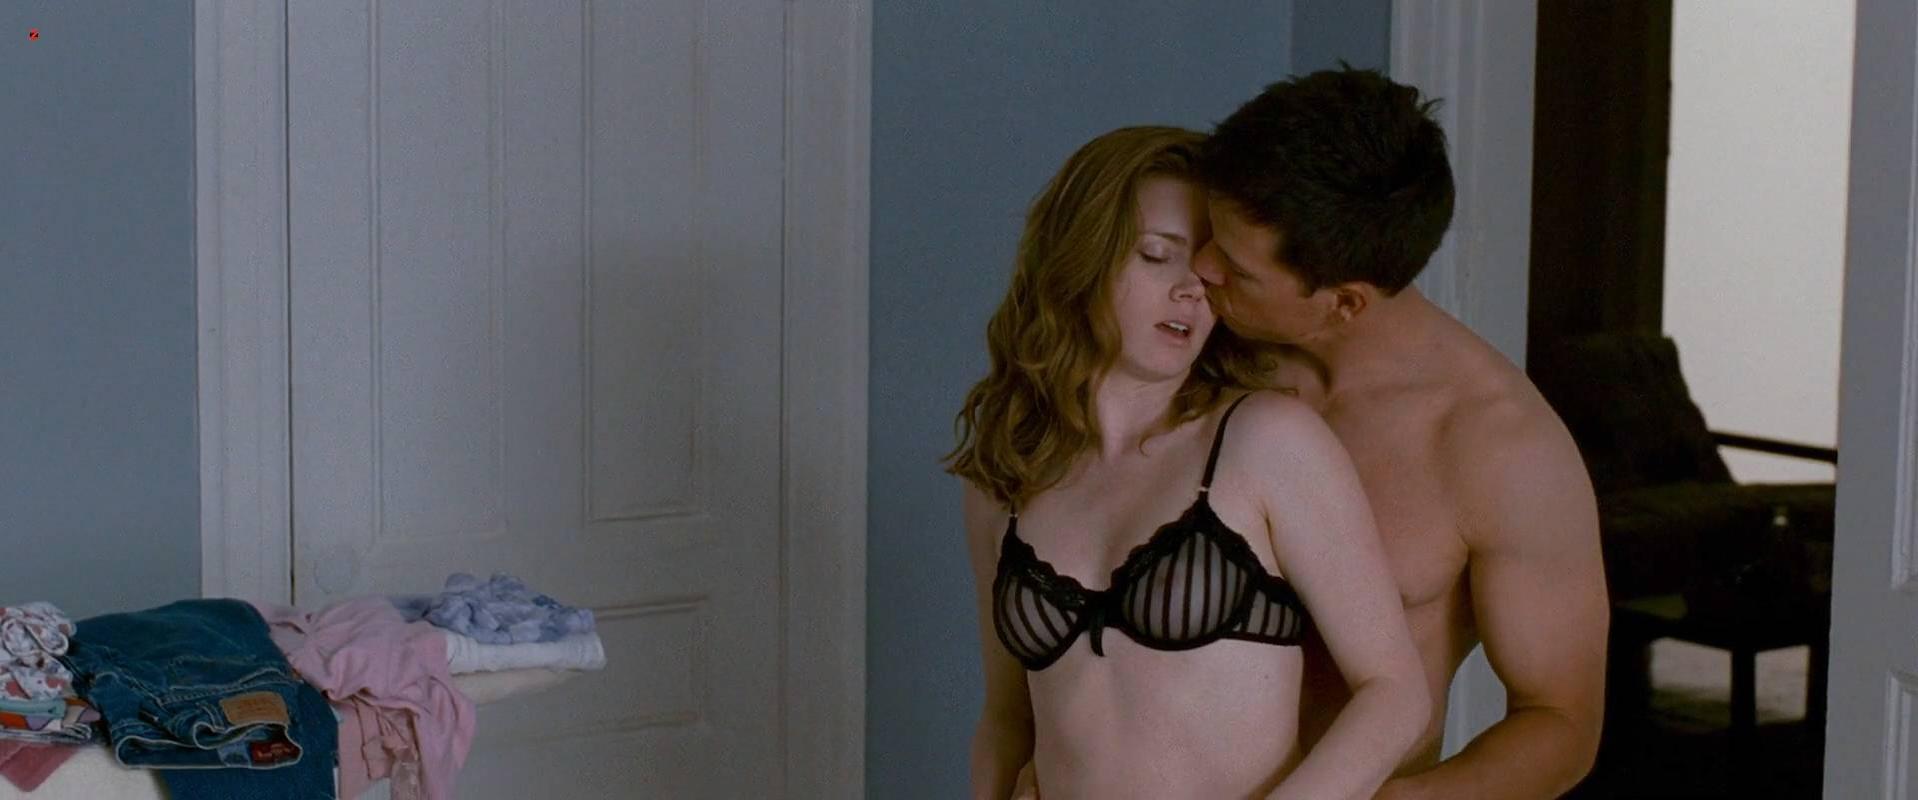 Amy Adams sexy - The Fighter (2010)